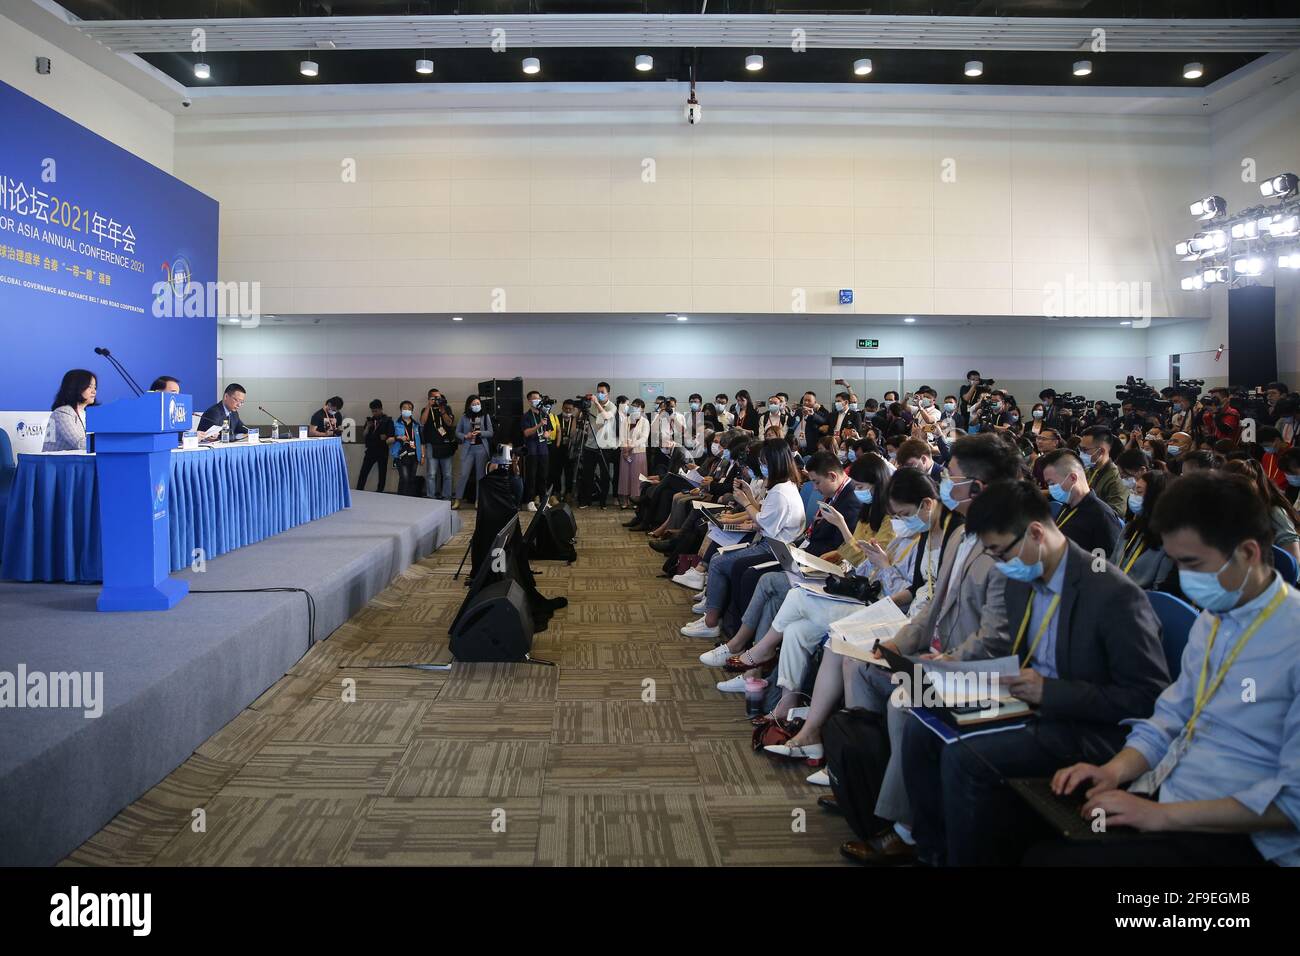 (210418) -- BOAO, April 18, 2021 (Xinhua) -- Photo taken on April 18, 2021 shows the press conference of the 2021 Boao Forum for Asia (BFA) annual conference and the launch of annual reports in Boao, south China's Hainan Province. The BFA's annual conference runs from April 18 to 21 in south China's island province of Hainan. This year's annual conference will be mainly held offline with the addition of online features as part of ongoing COVID-19 prevention and control efforts, with over 2,600 delegates expected to participate in person, making it the world's first large-scale international c Stock Photo